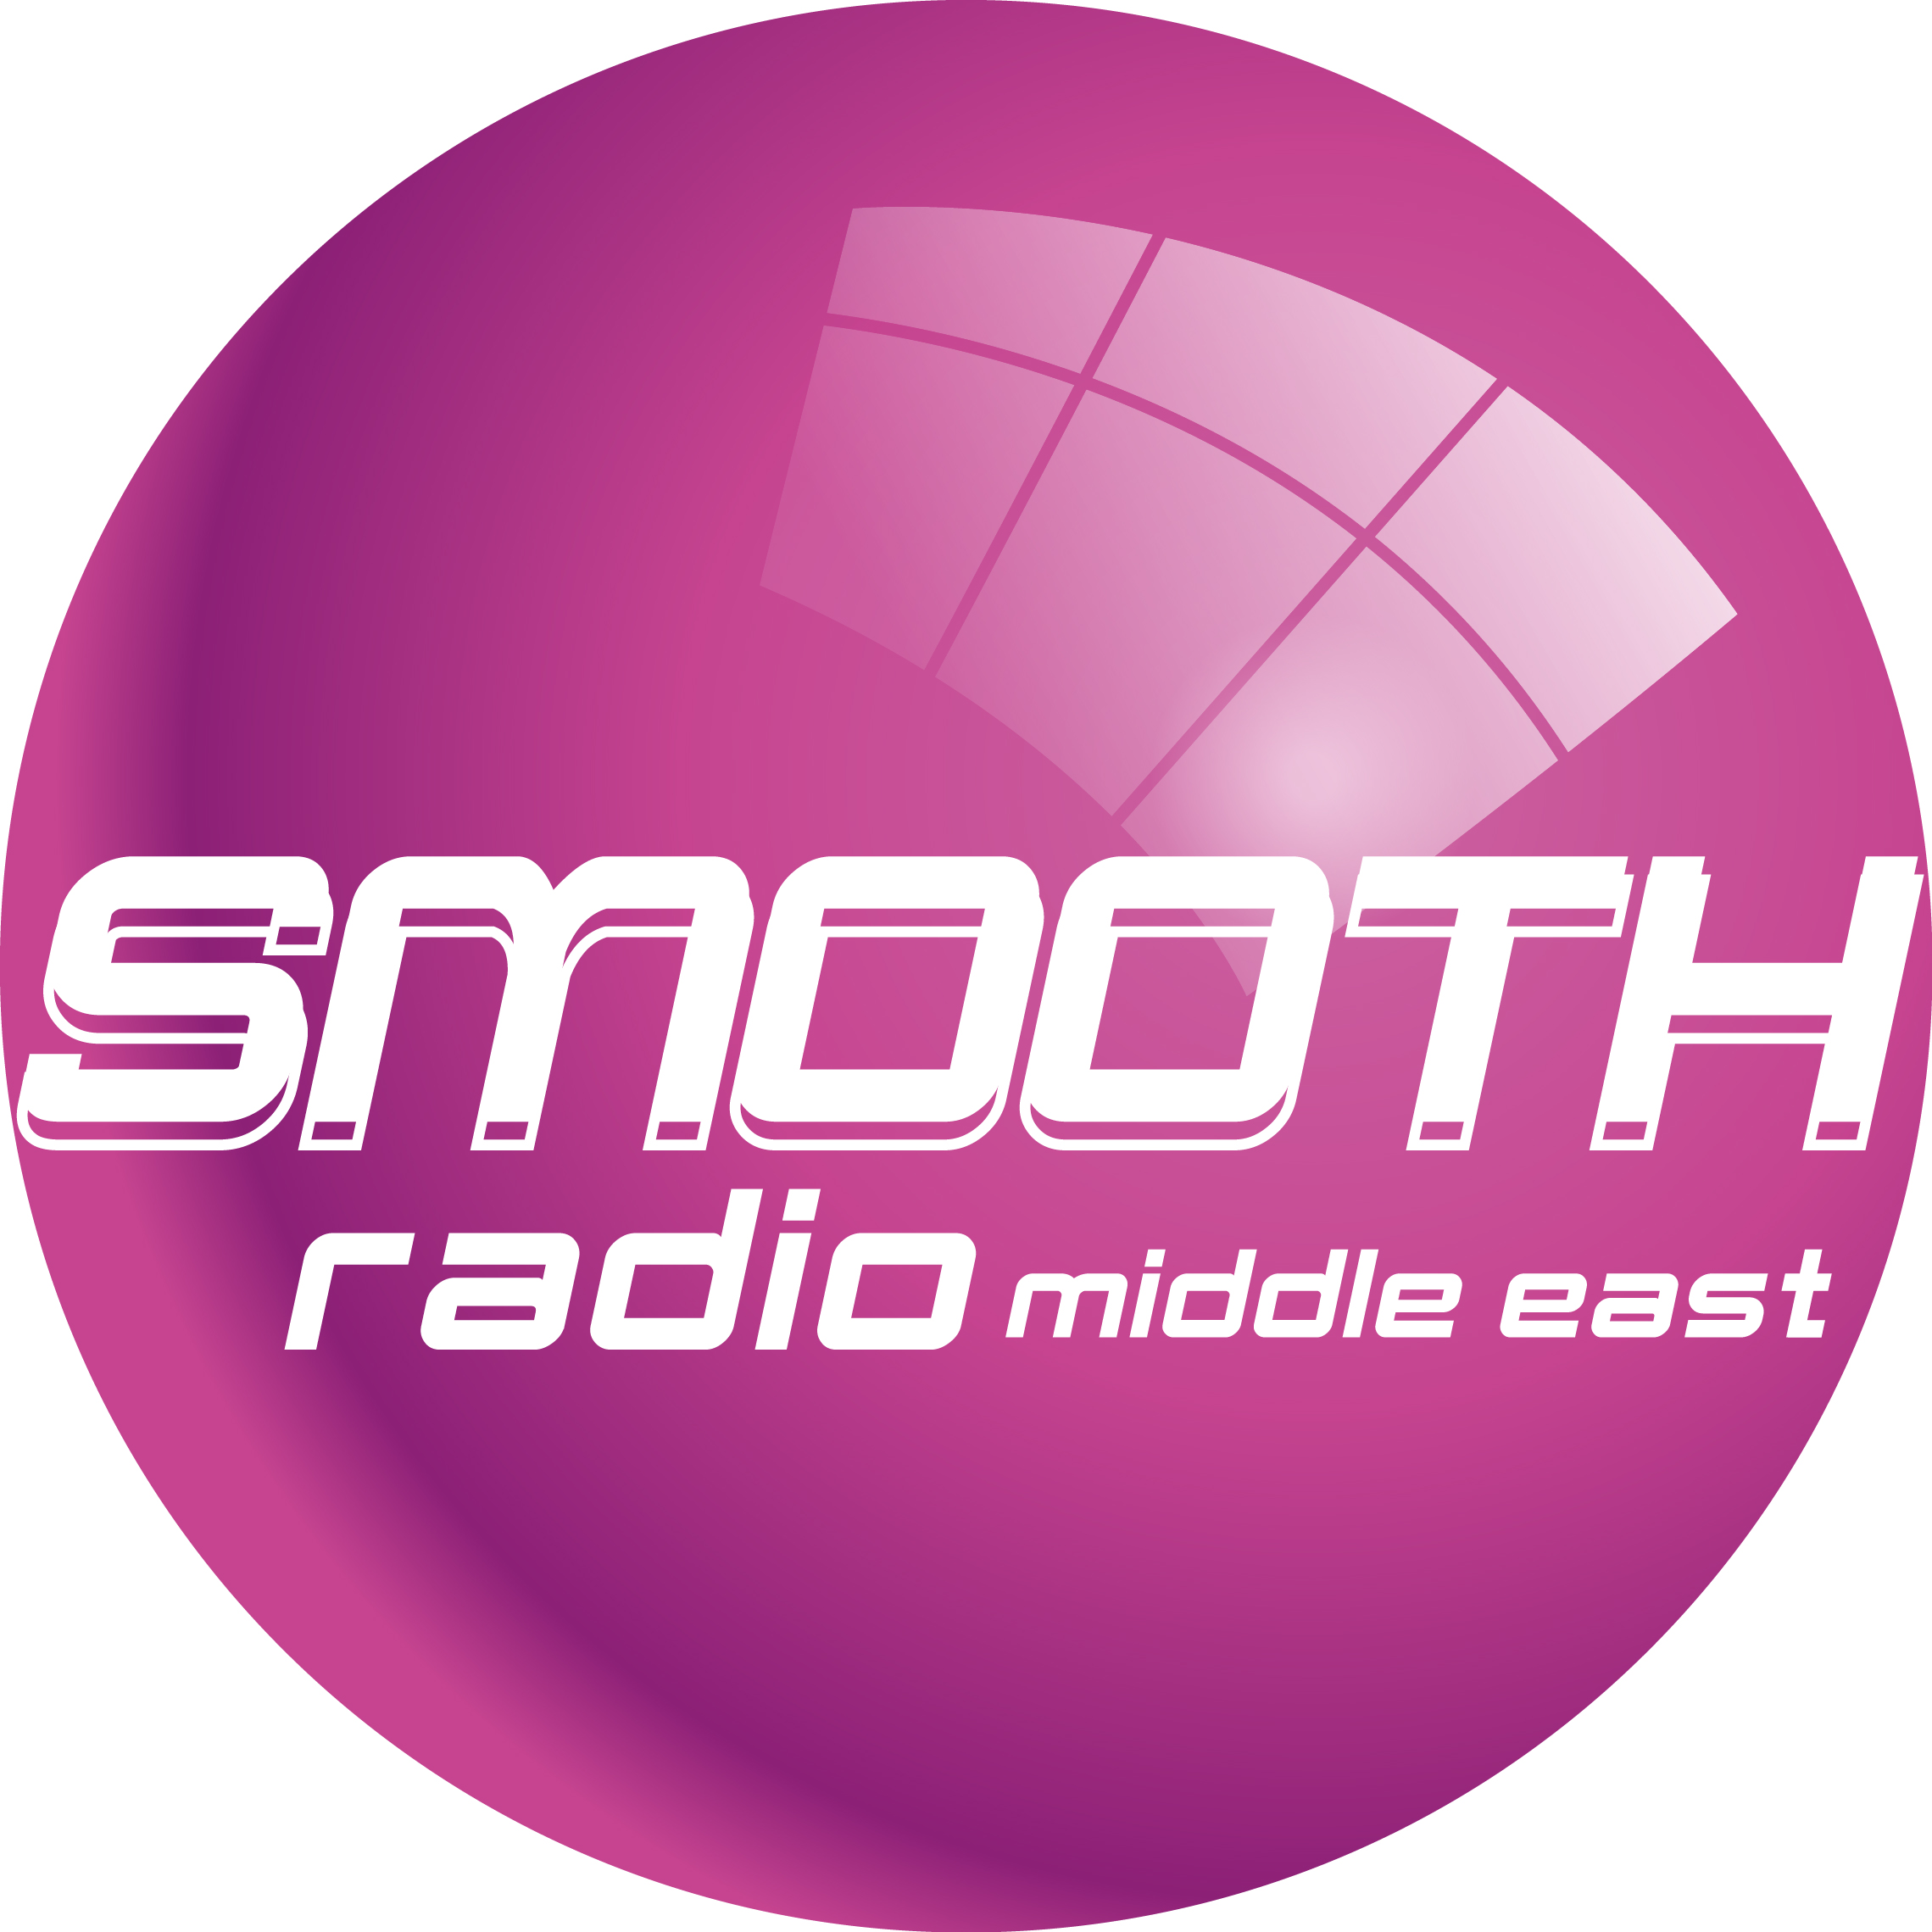 About Smooth Radio - Smooth